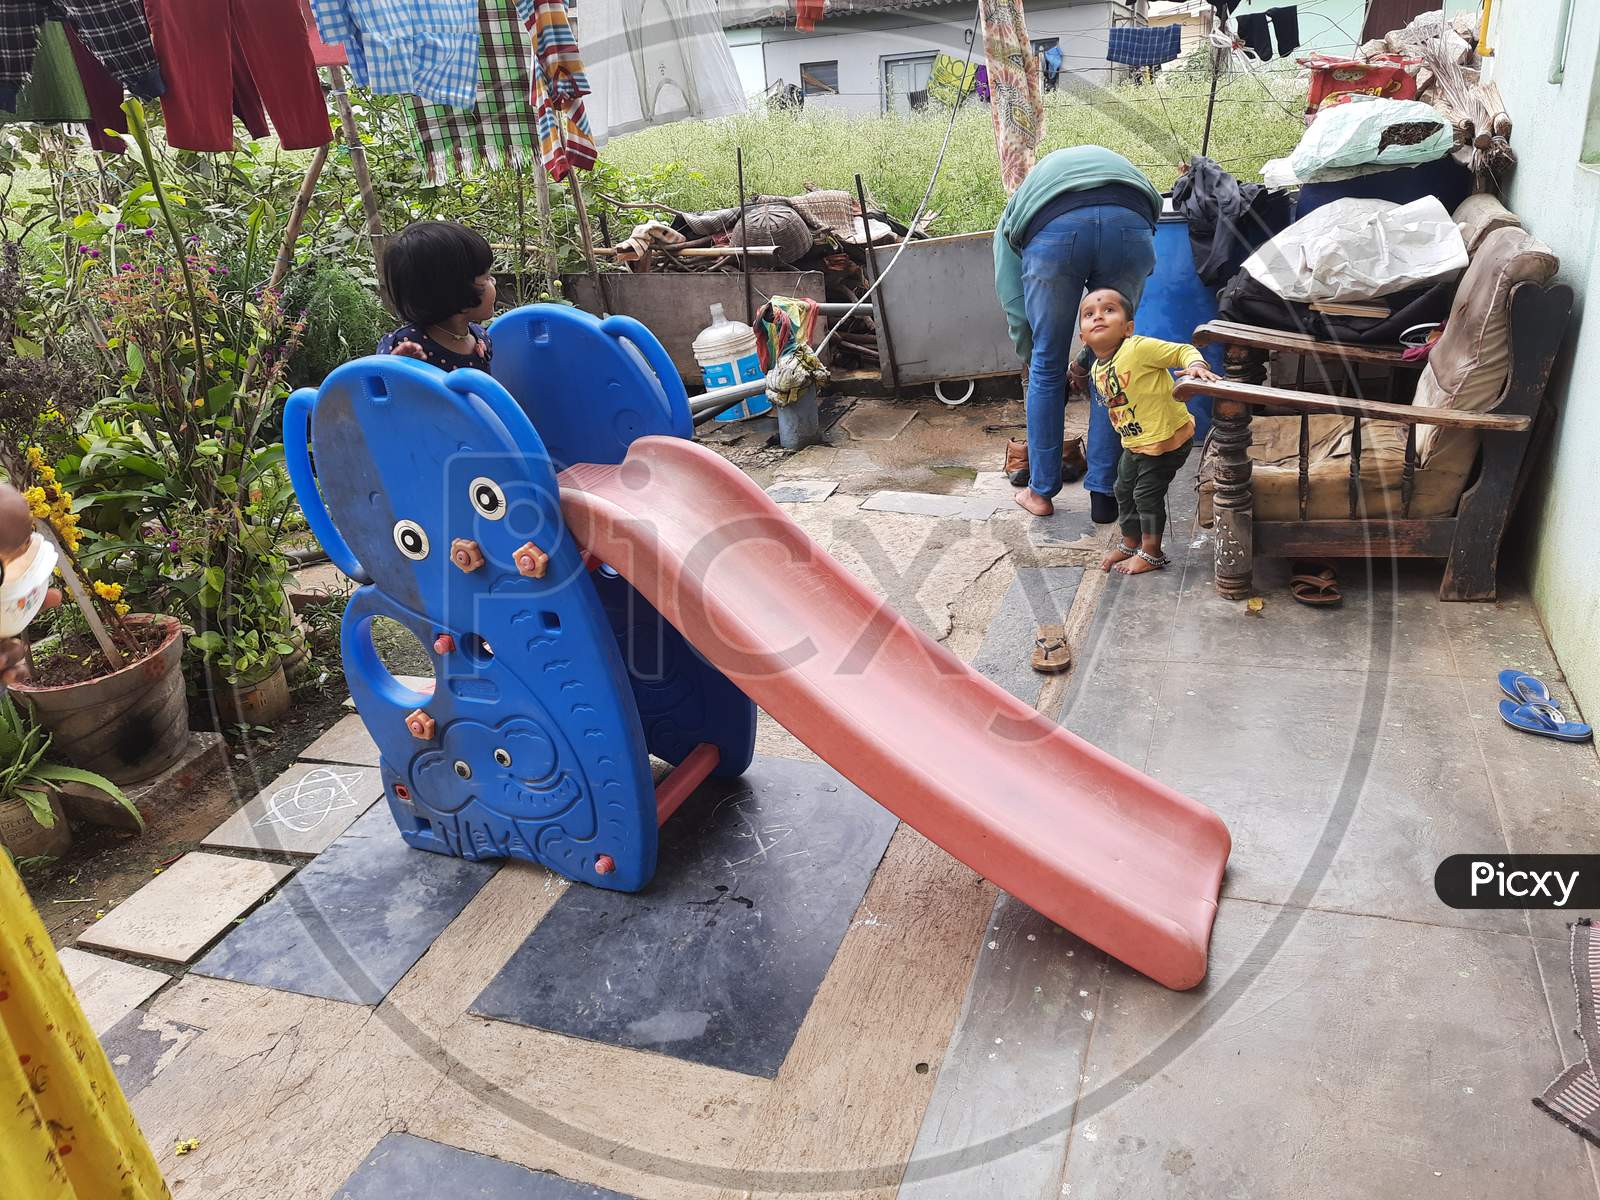 Group of Indian Kids Playing in a Mobile Plastic slides, climbers in front of the house